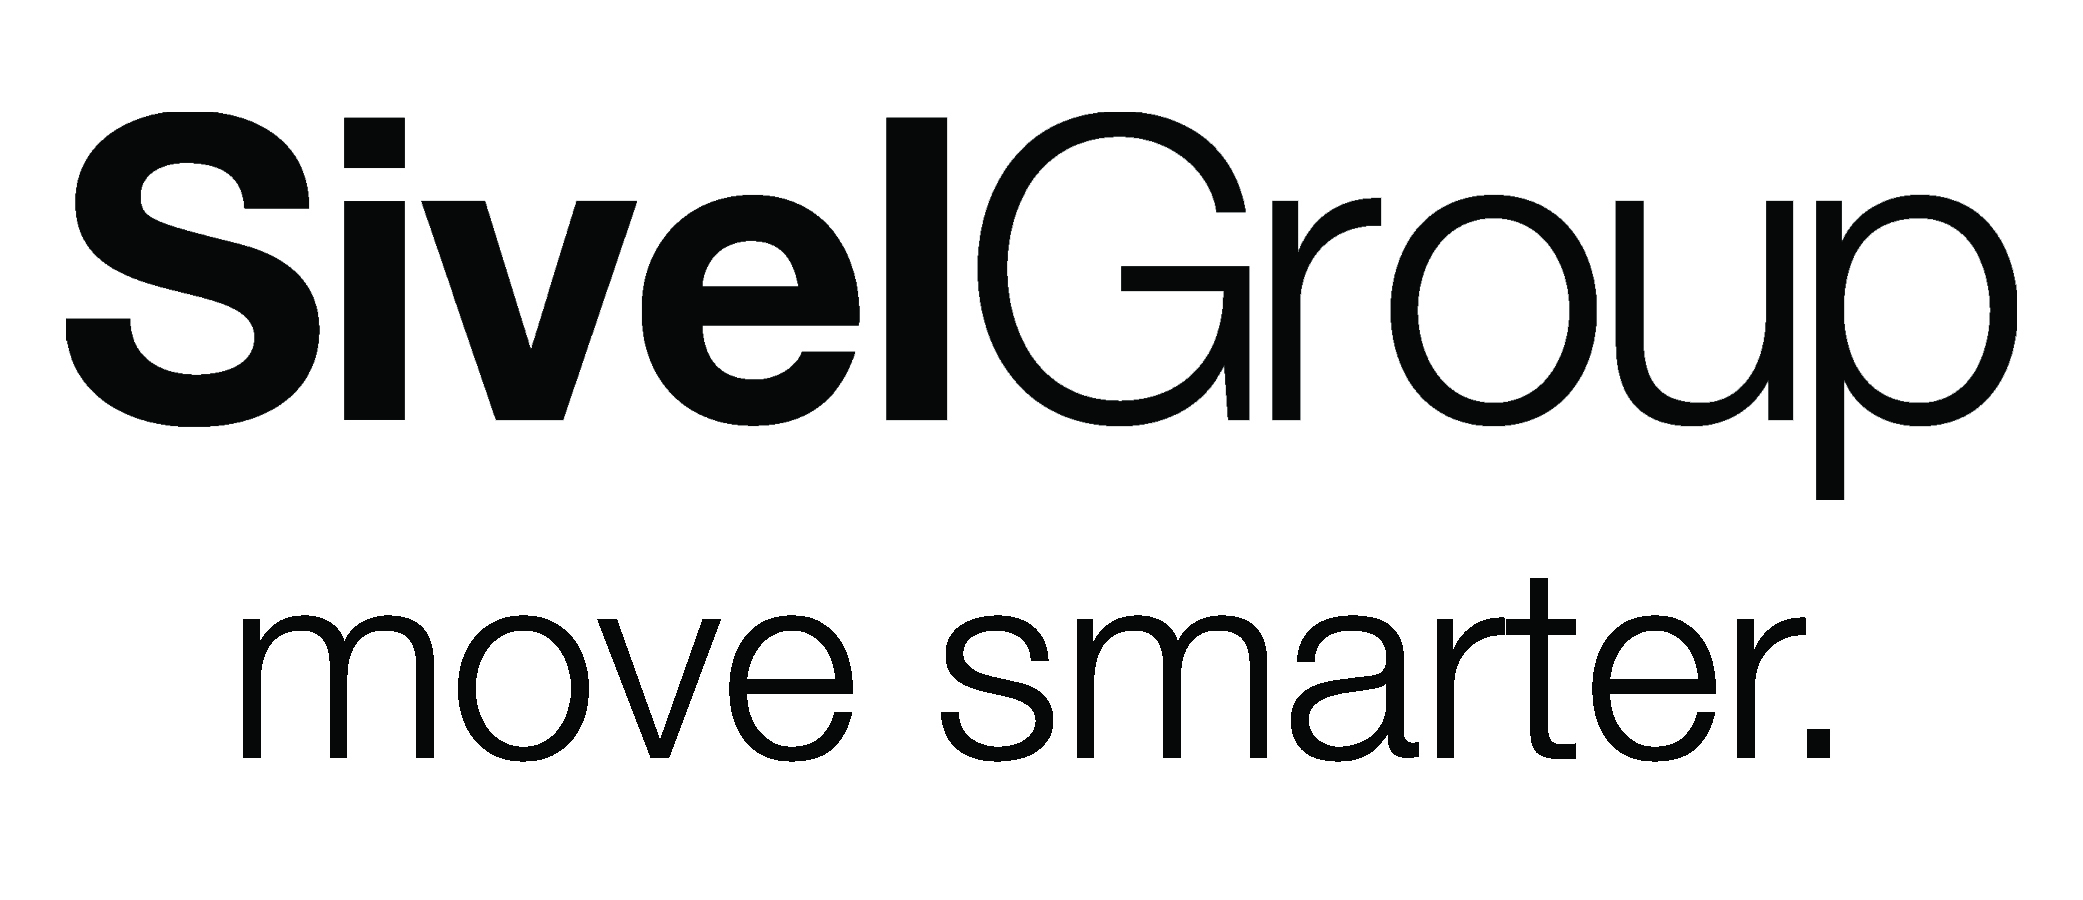 The Sivel Group